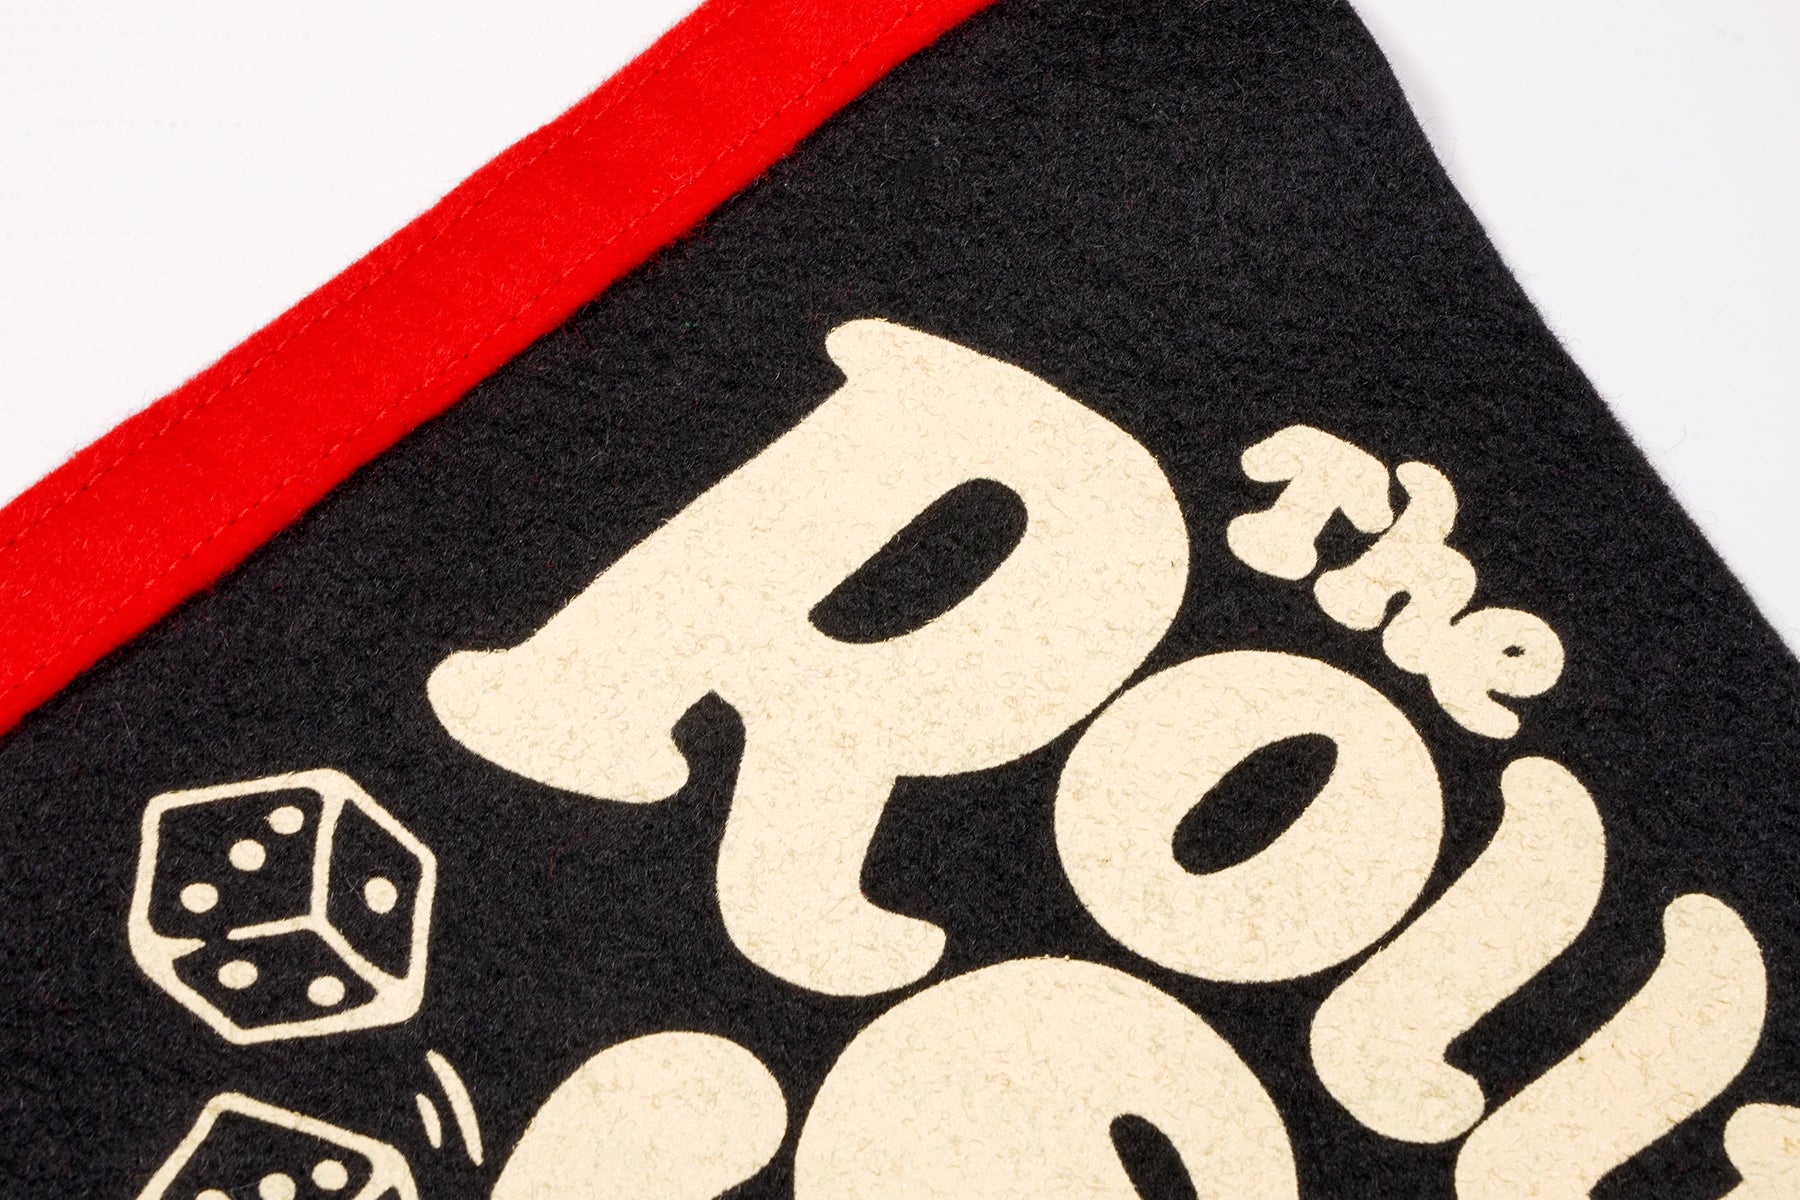 The Rolling Stones - Tumbling Dice Pennant (Black)